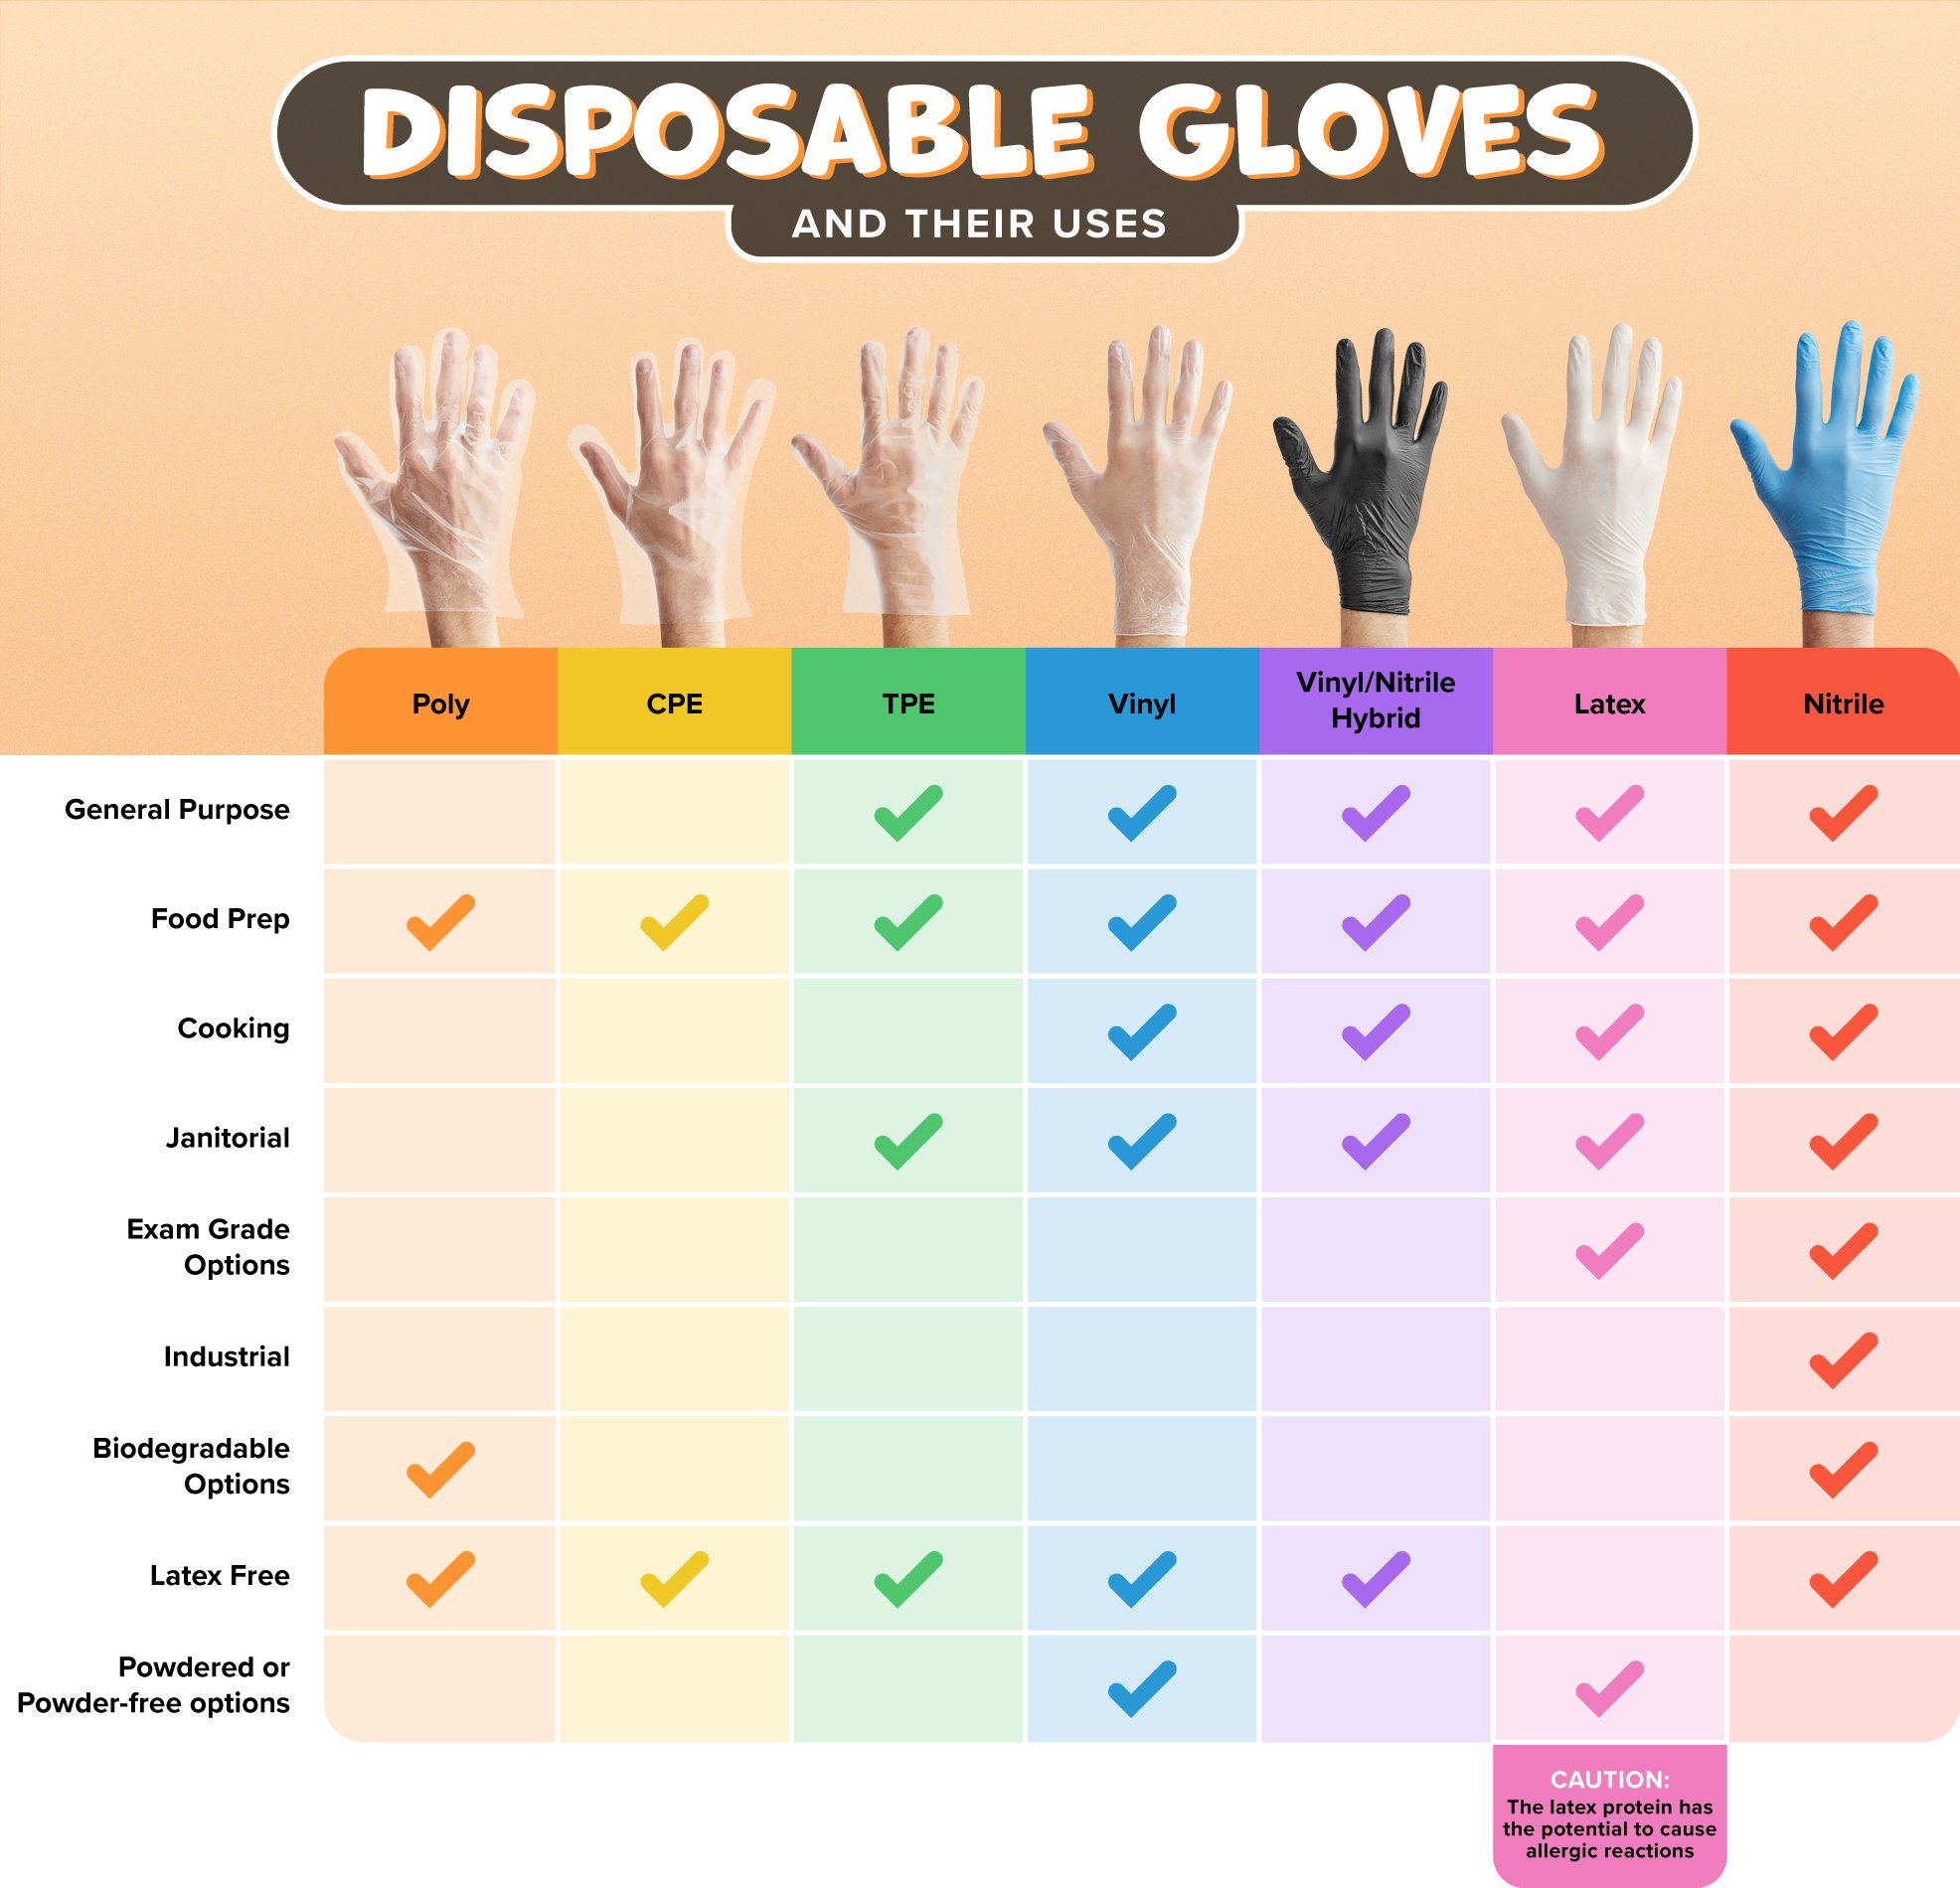 graphic comparing types of disposable gloves